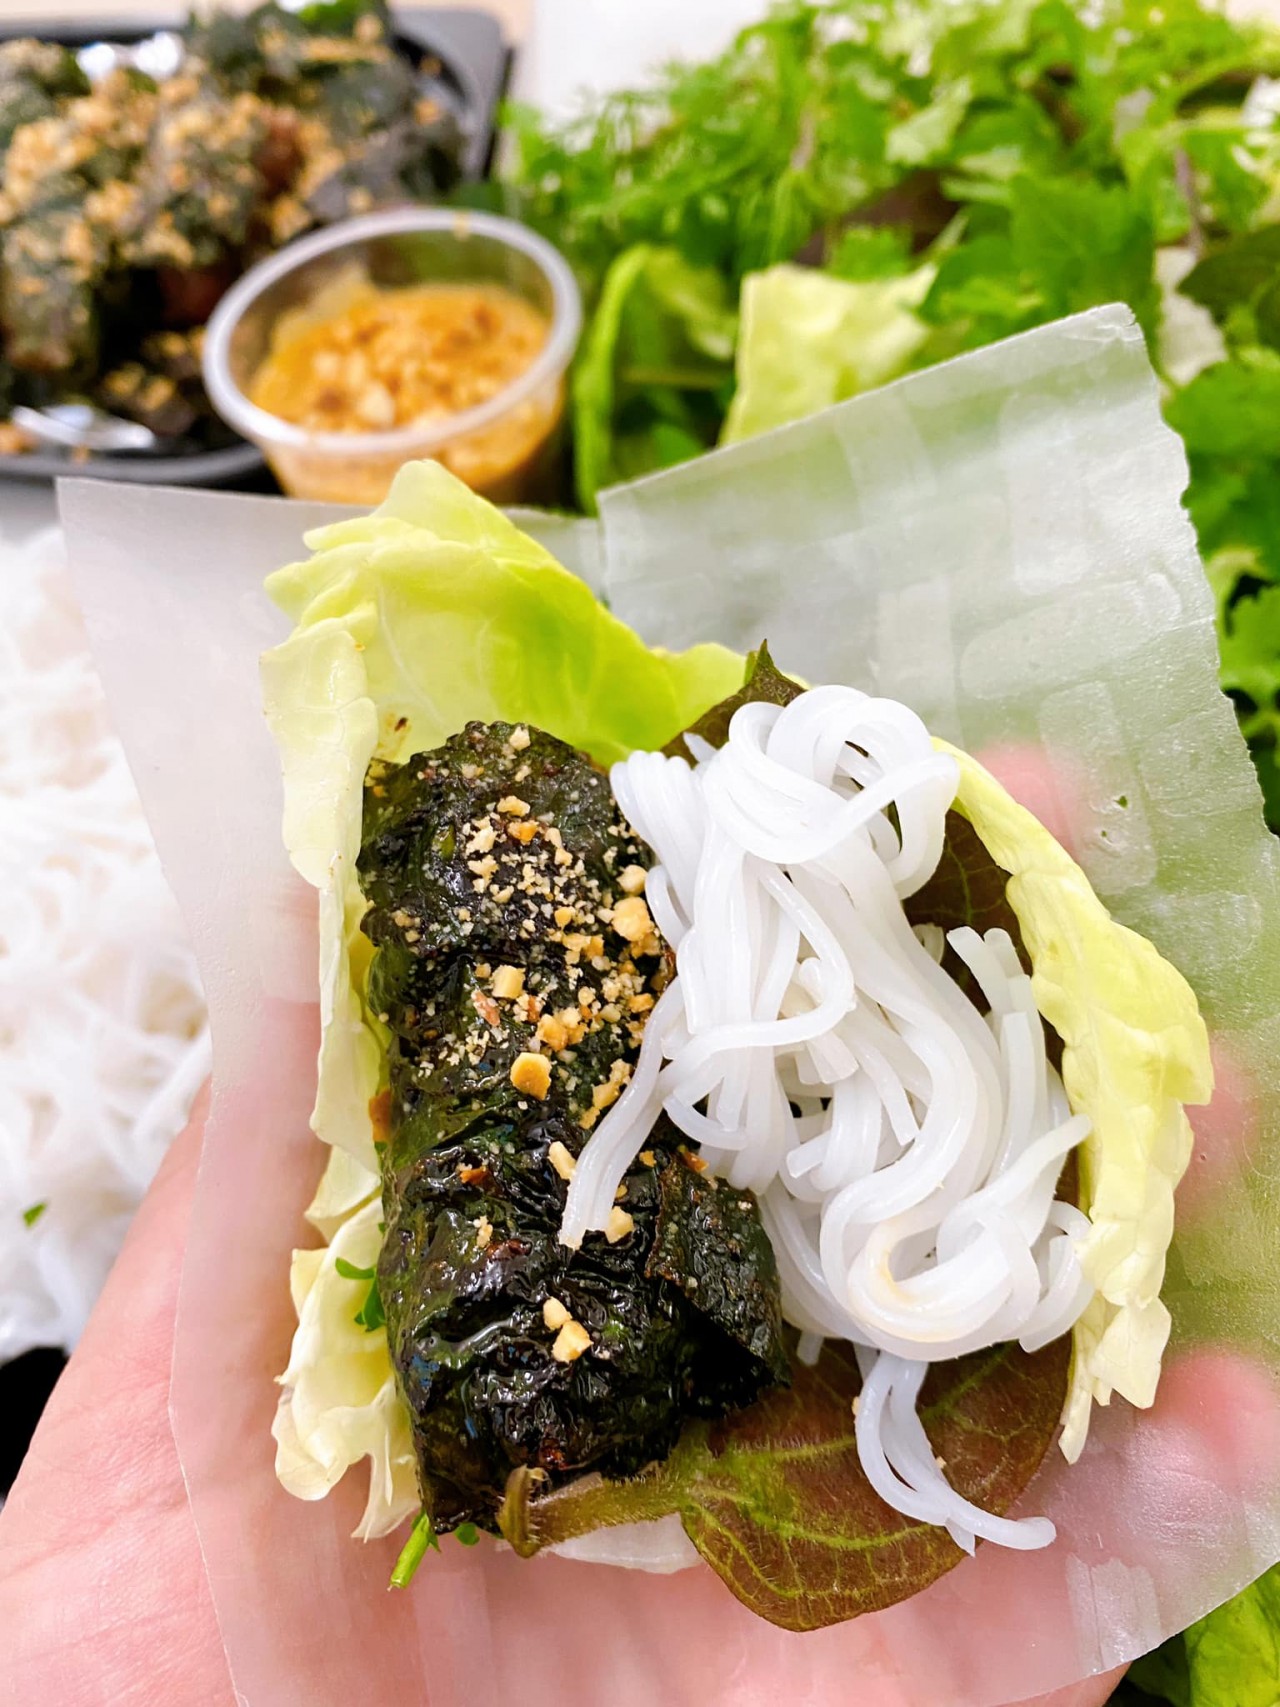 Australia's Article Hails Vietnamese “Beef in A Leaf” as One of World’s Best Dishes